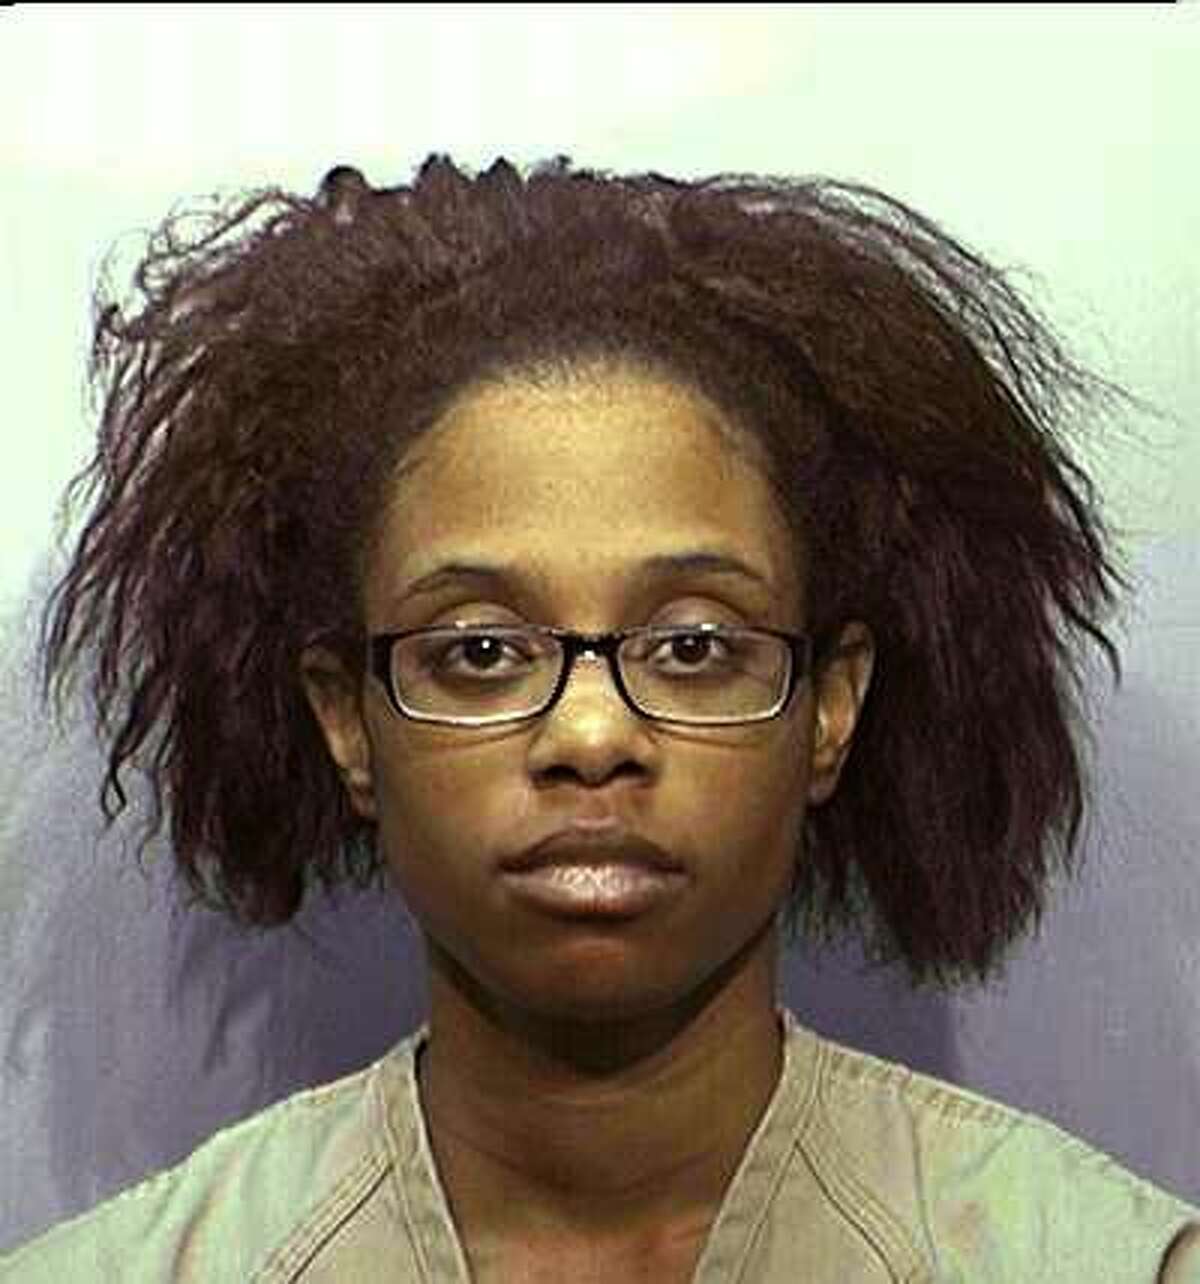 Dainesha Stevens, mother of Cameron Beckford, is seen in an undated photo provided by the Franklin County, Ohio, Sheriff's Office. Judge Michael Brandt set bond at $75,000 each on Wednesday, Dec. 31, 2014, for Dainesha Stevens for charges of endangering children and tampering with evidence. Stevens' attorney Mark Collins says his client is cooperating with police in their search for the toddler, who authorities warn may be dead. Collins says Stevens made up the story about leaving the child on the porch and says that was her way of reaching out for help. (AP Photo/Franklin County, Ohio, Sheriff's Office)